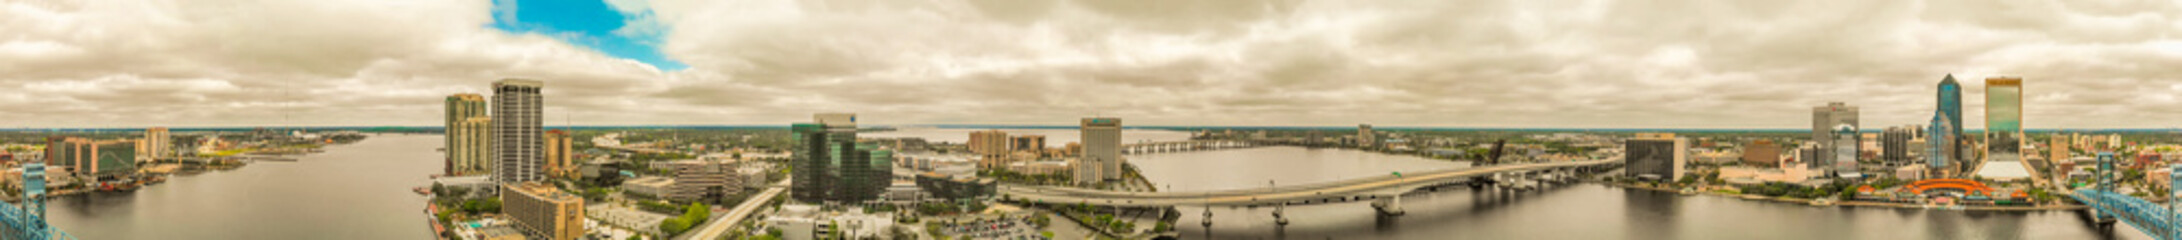 Jacksonville, FL - April 2018: Panoramic aerial view of the city with buildings and river